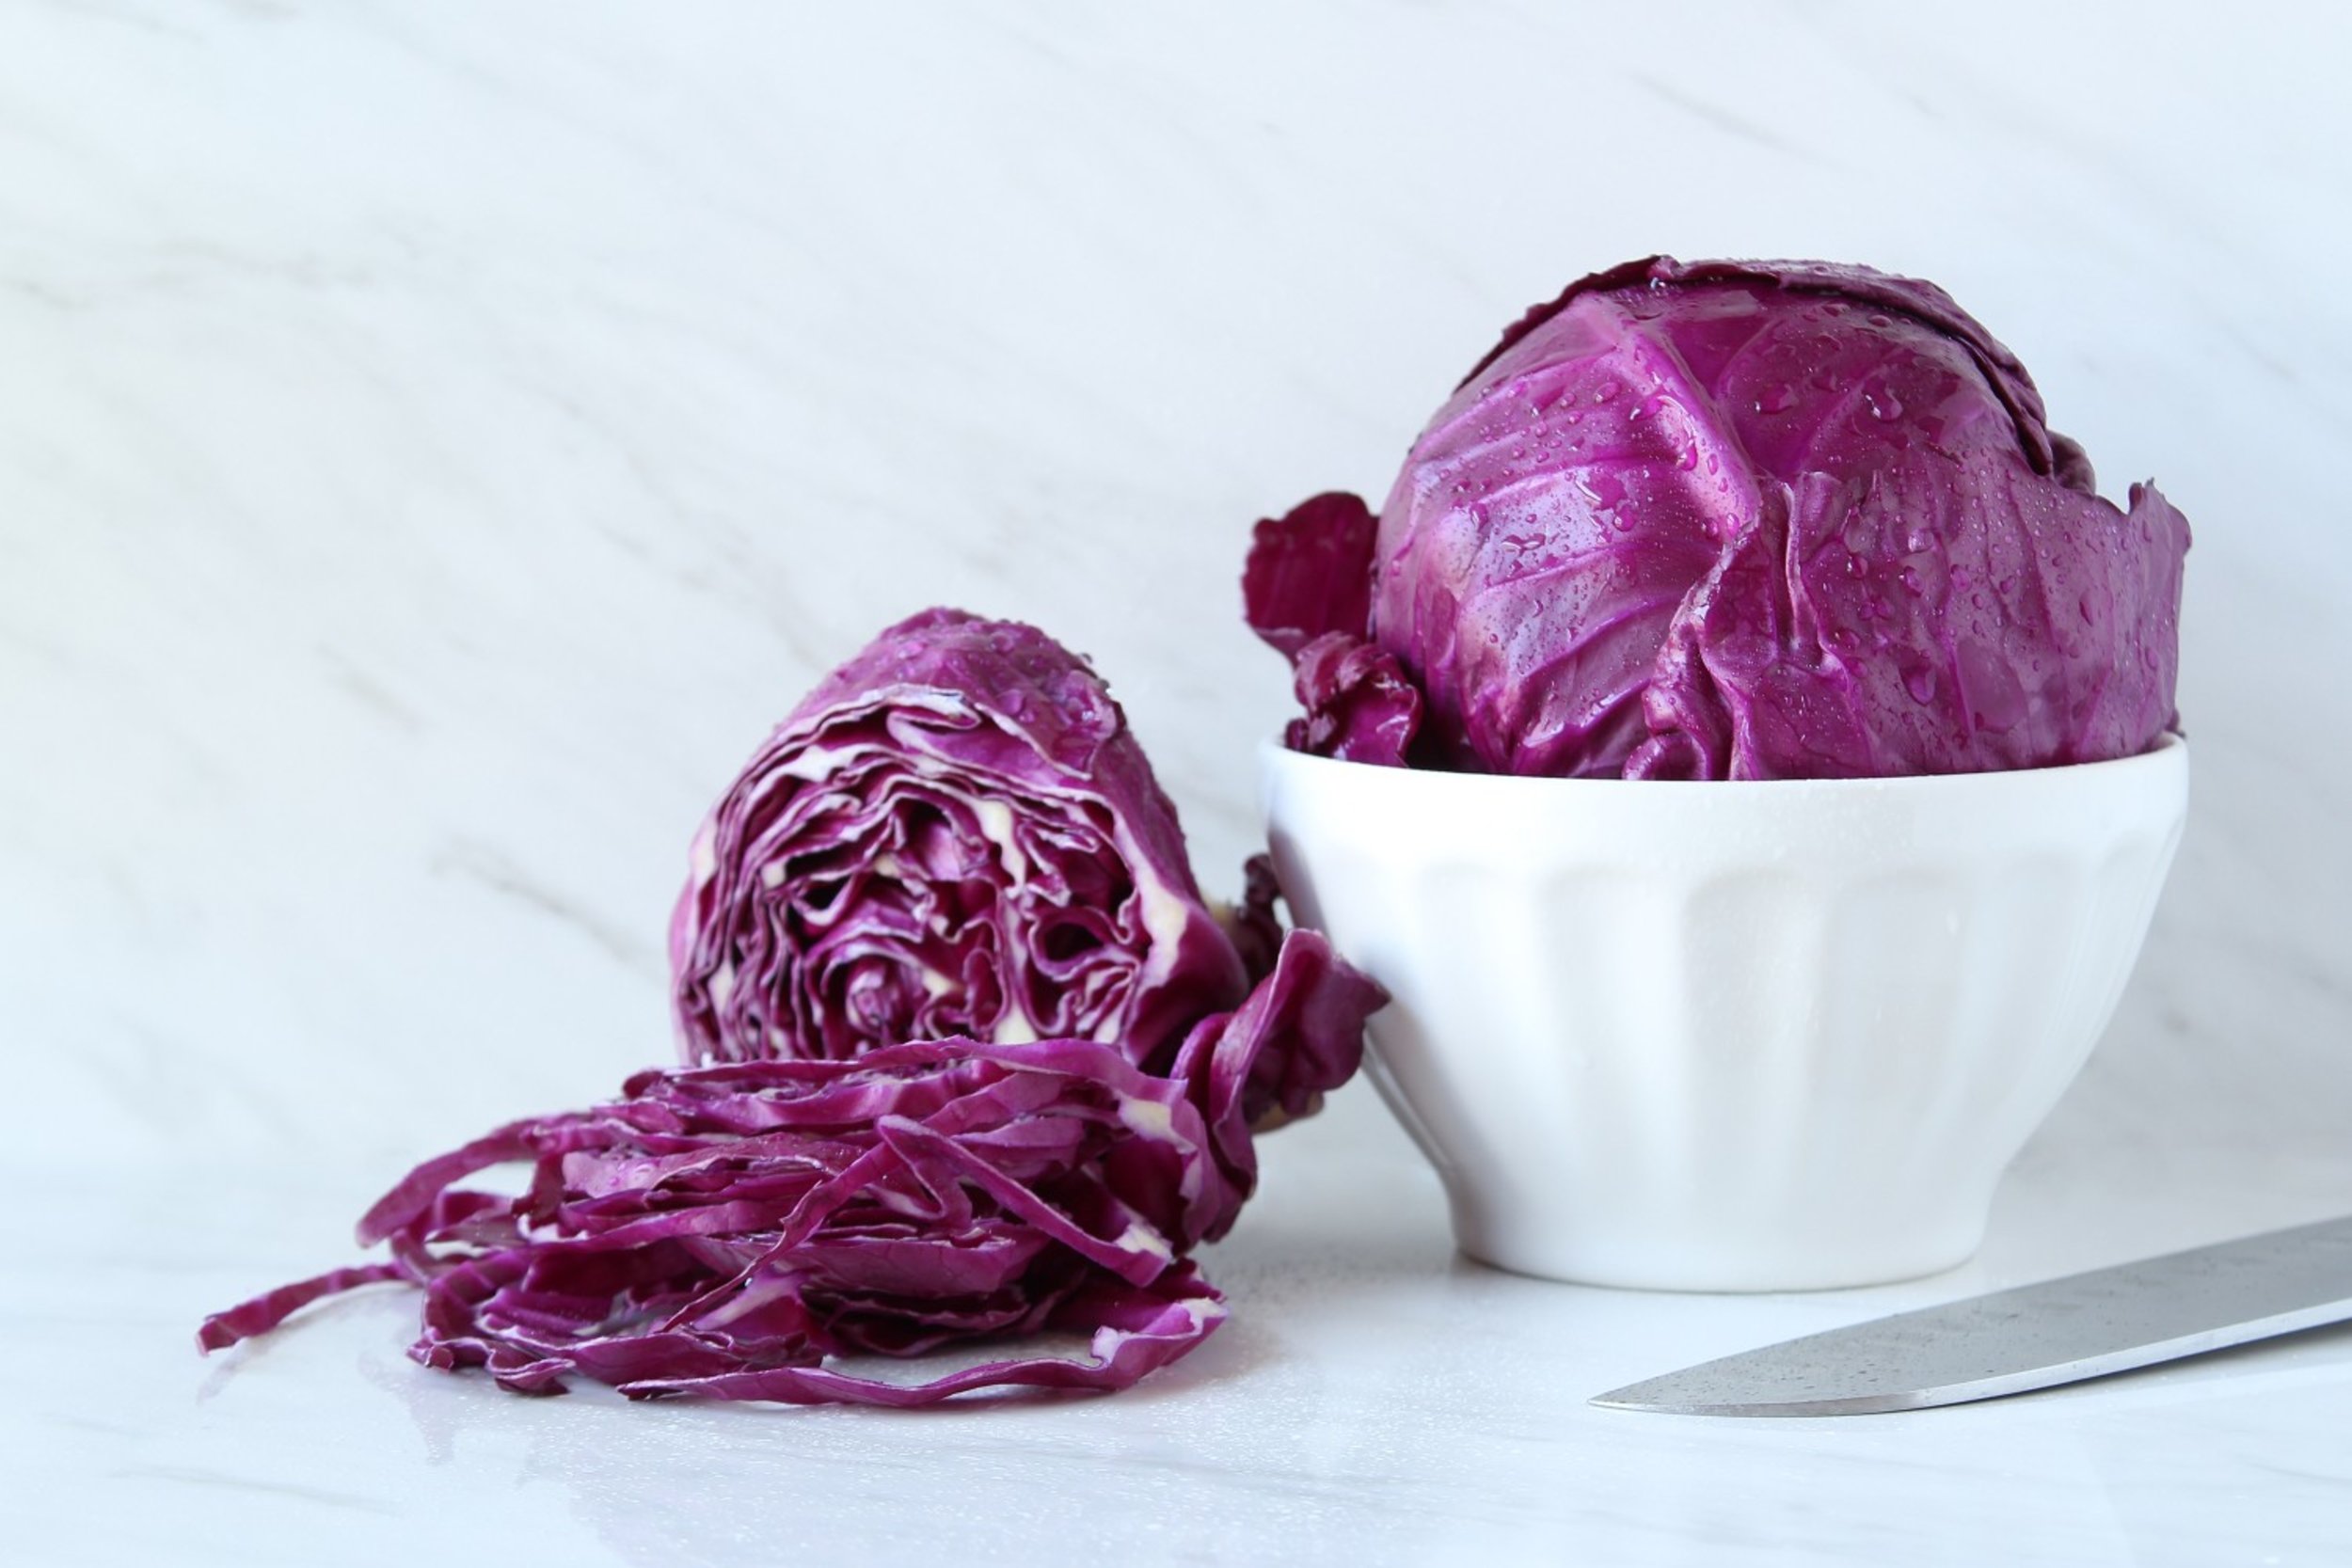 can i feed my dog red cabbage